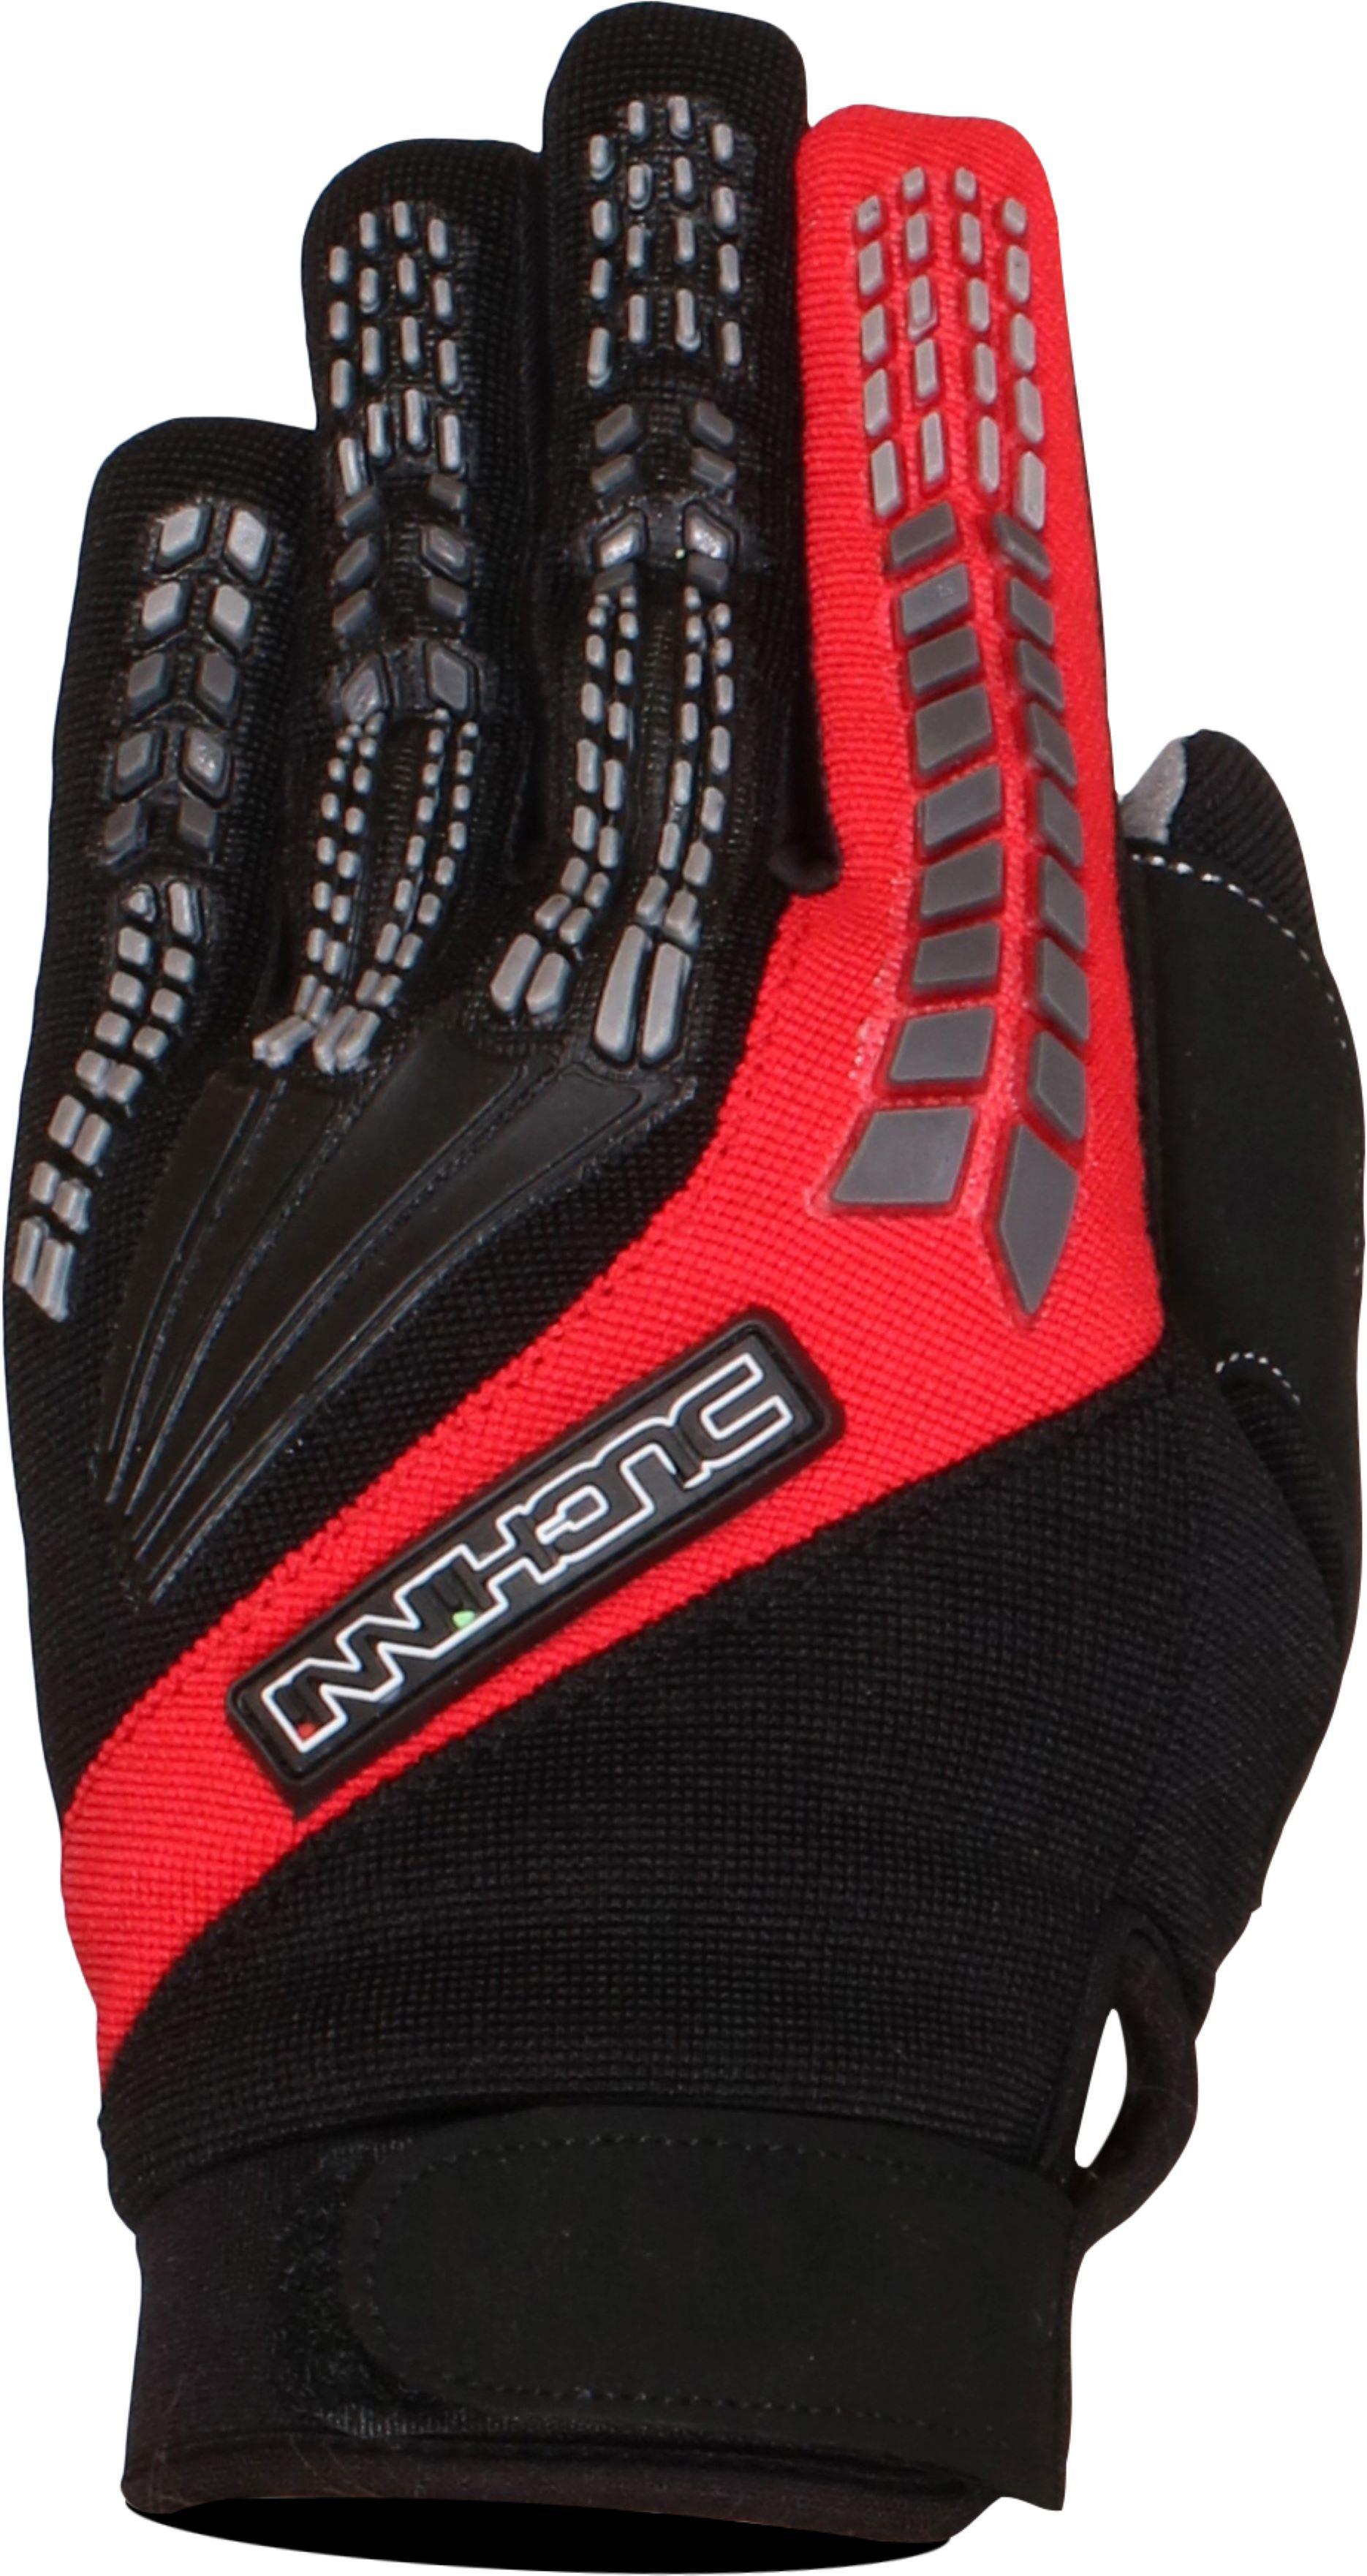 Duchinni Focus Motorcycle Gloves - Black And Red, 2Xl